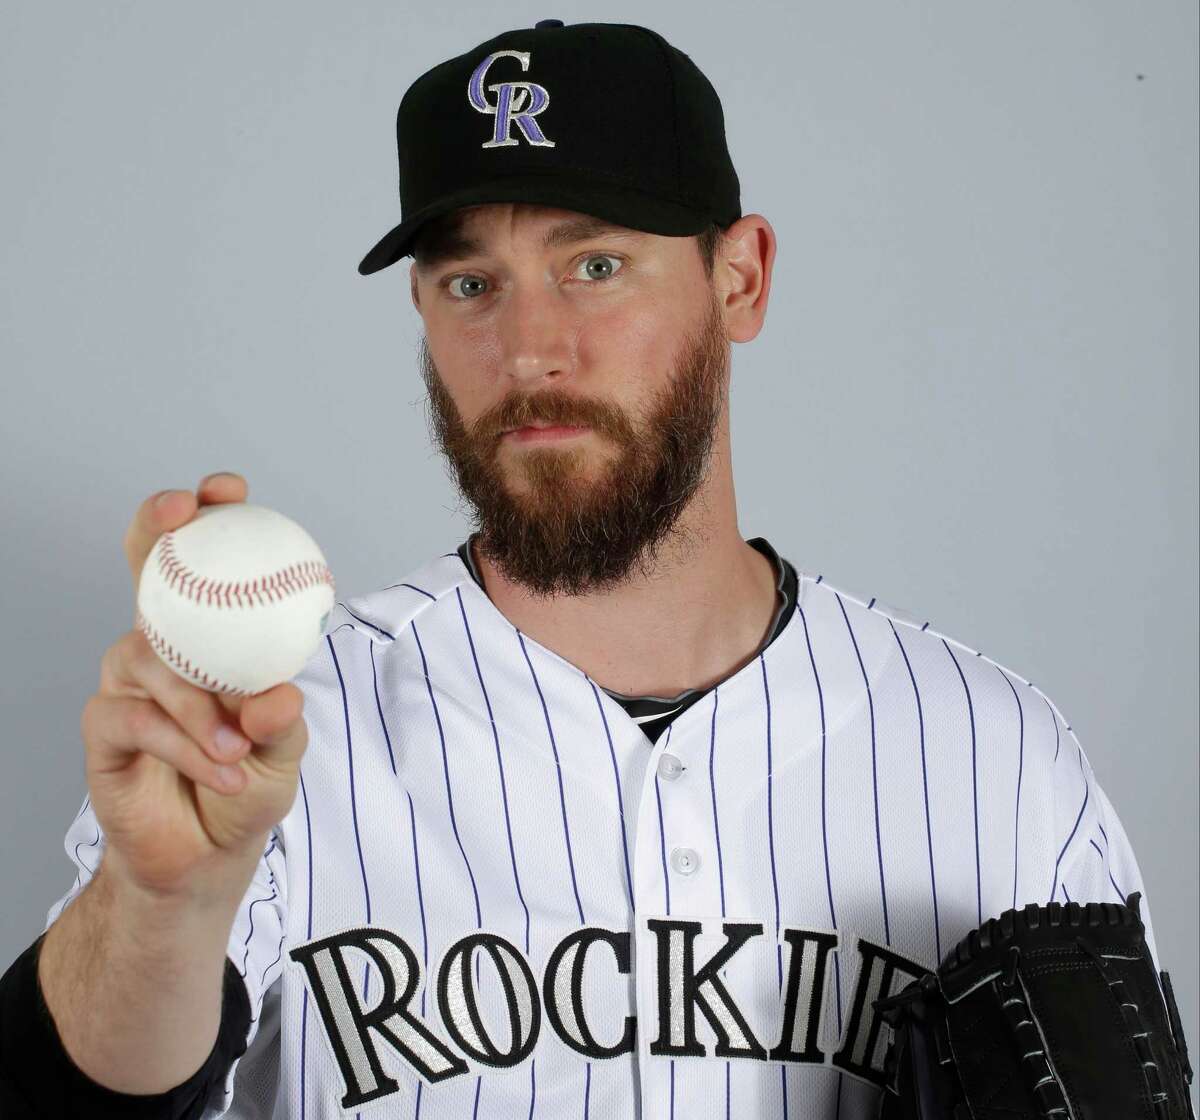 FILE - In a March 2015 file photo, John Axford of the Colorado Rockies baseball team poses for a photo in Scottsdale, Ariz. Axford's 2-year-old son is improving following a rattlesnake bite. Jameson Axford remained hospitalized for an eighth straight day, but Axford said Wednesday, Apri his son was able to sleep through the night as he deals with pain. Doctors have saved his right foot, but there is fear one of his toes may need to be amputated. "It's looking better," Axford said. "We're going by doctors' orders. They know more than we do. We're going to trust them to heal him the best way possible." (AP Photo/Darron Cummings, File)